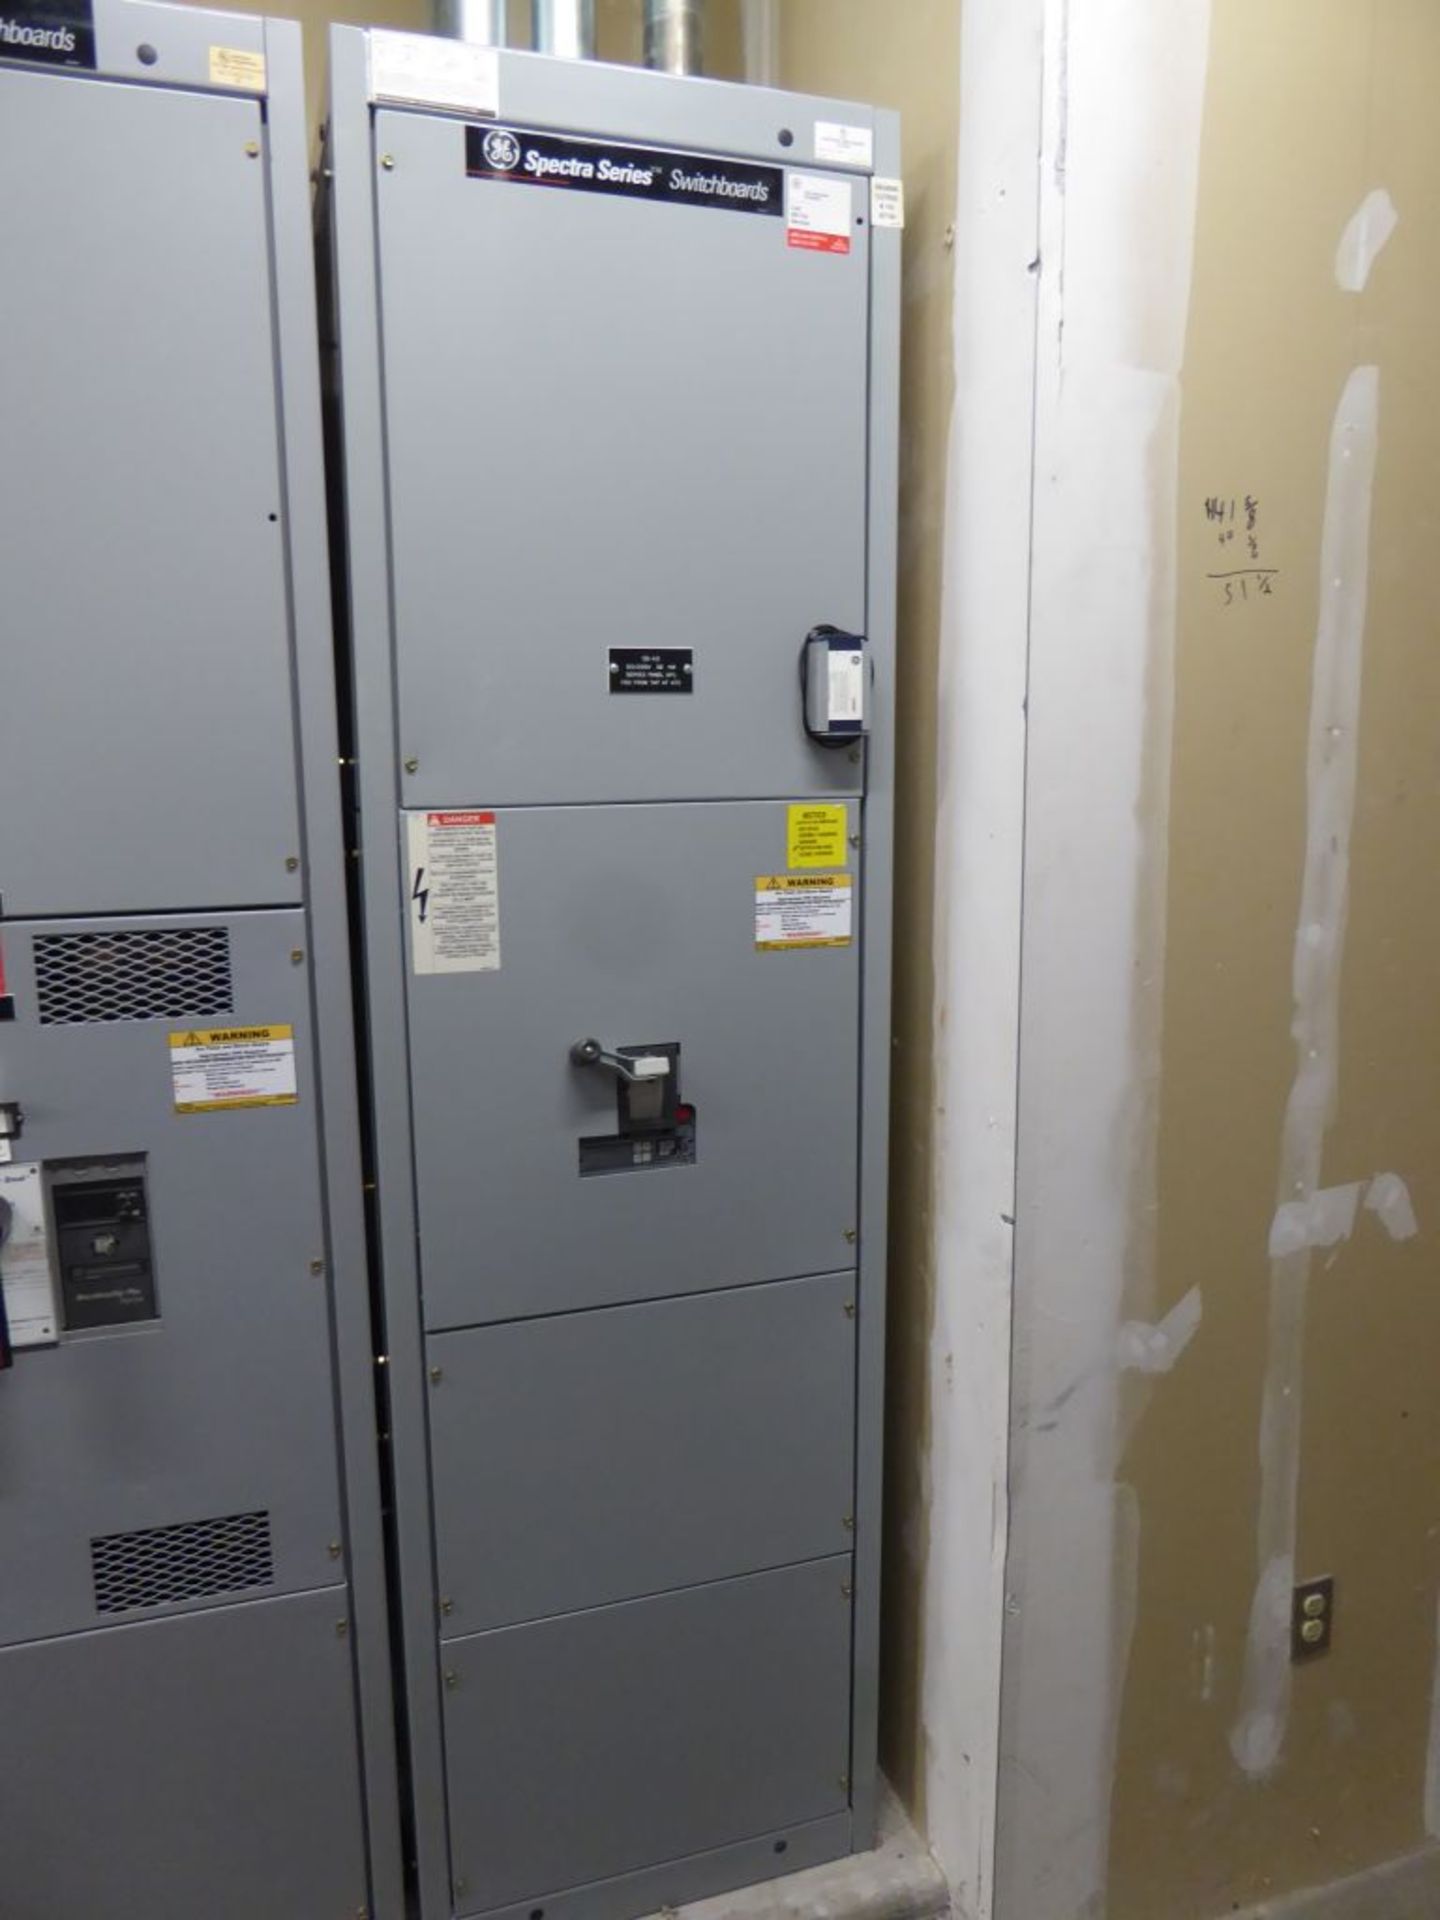 Spartanburg, SC - GE 800A Spectra Series Switchboard